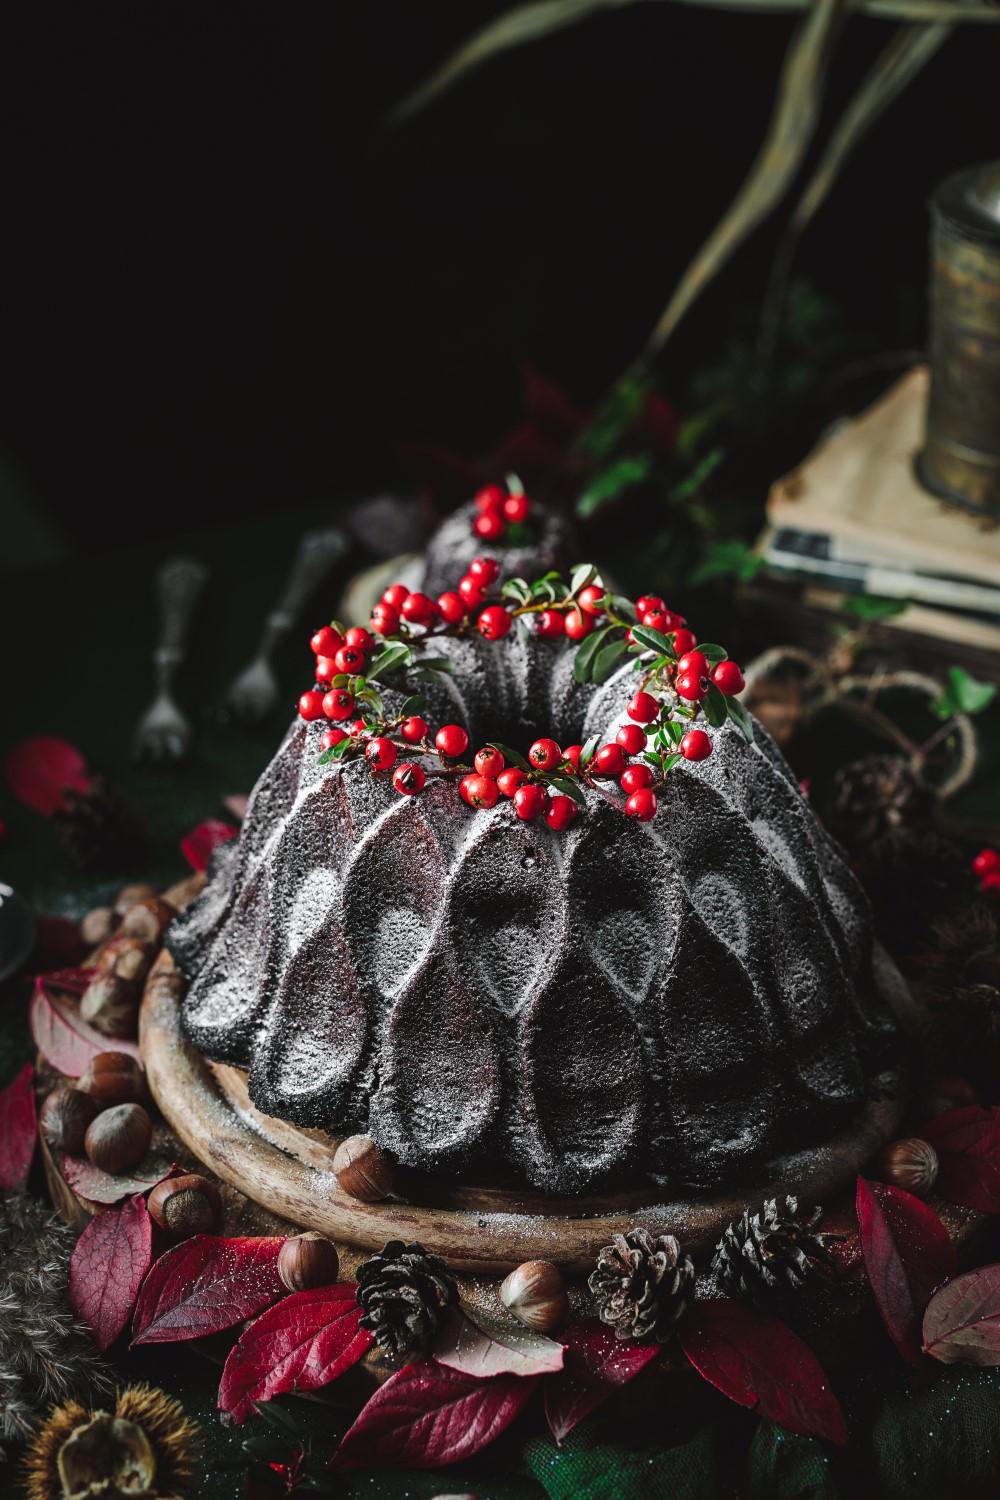 This simple but super rich chocolate hazelnut bundt cake recipe is guaranteed to impress at your Christmas dinner.